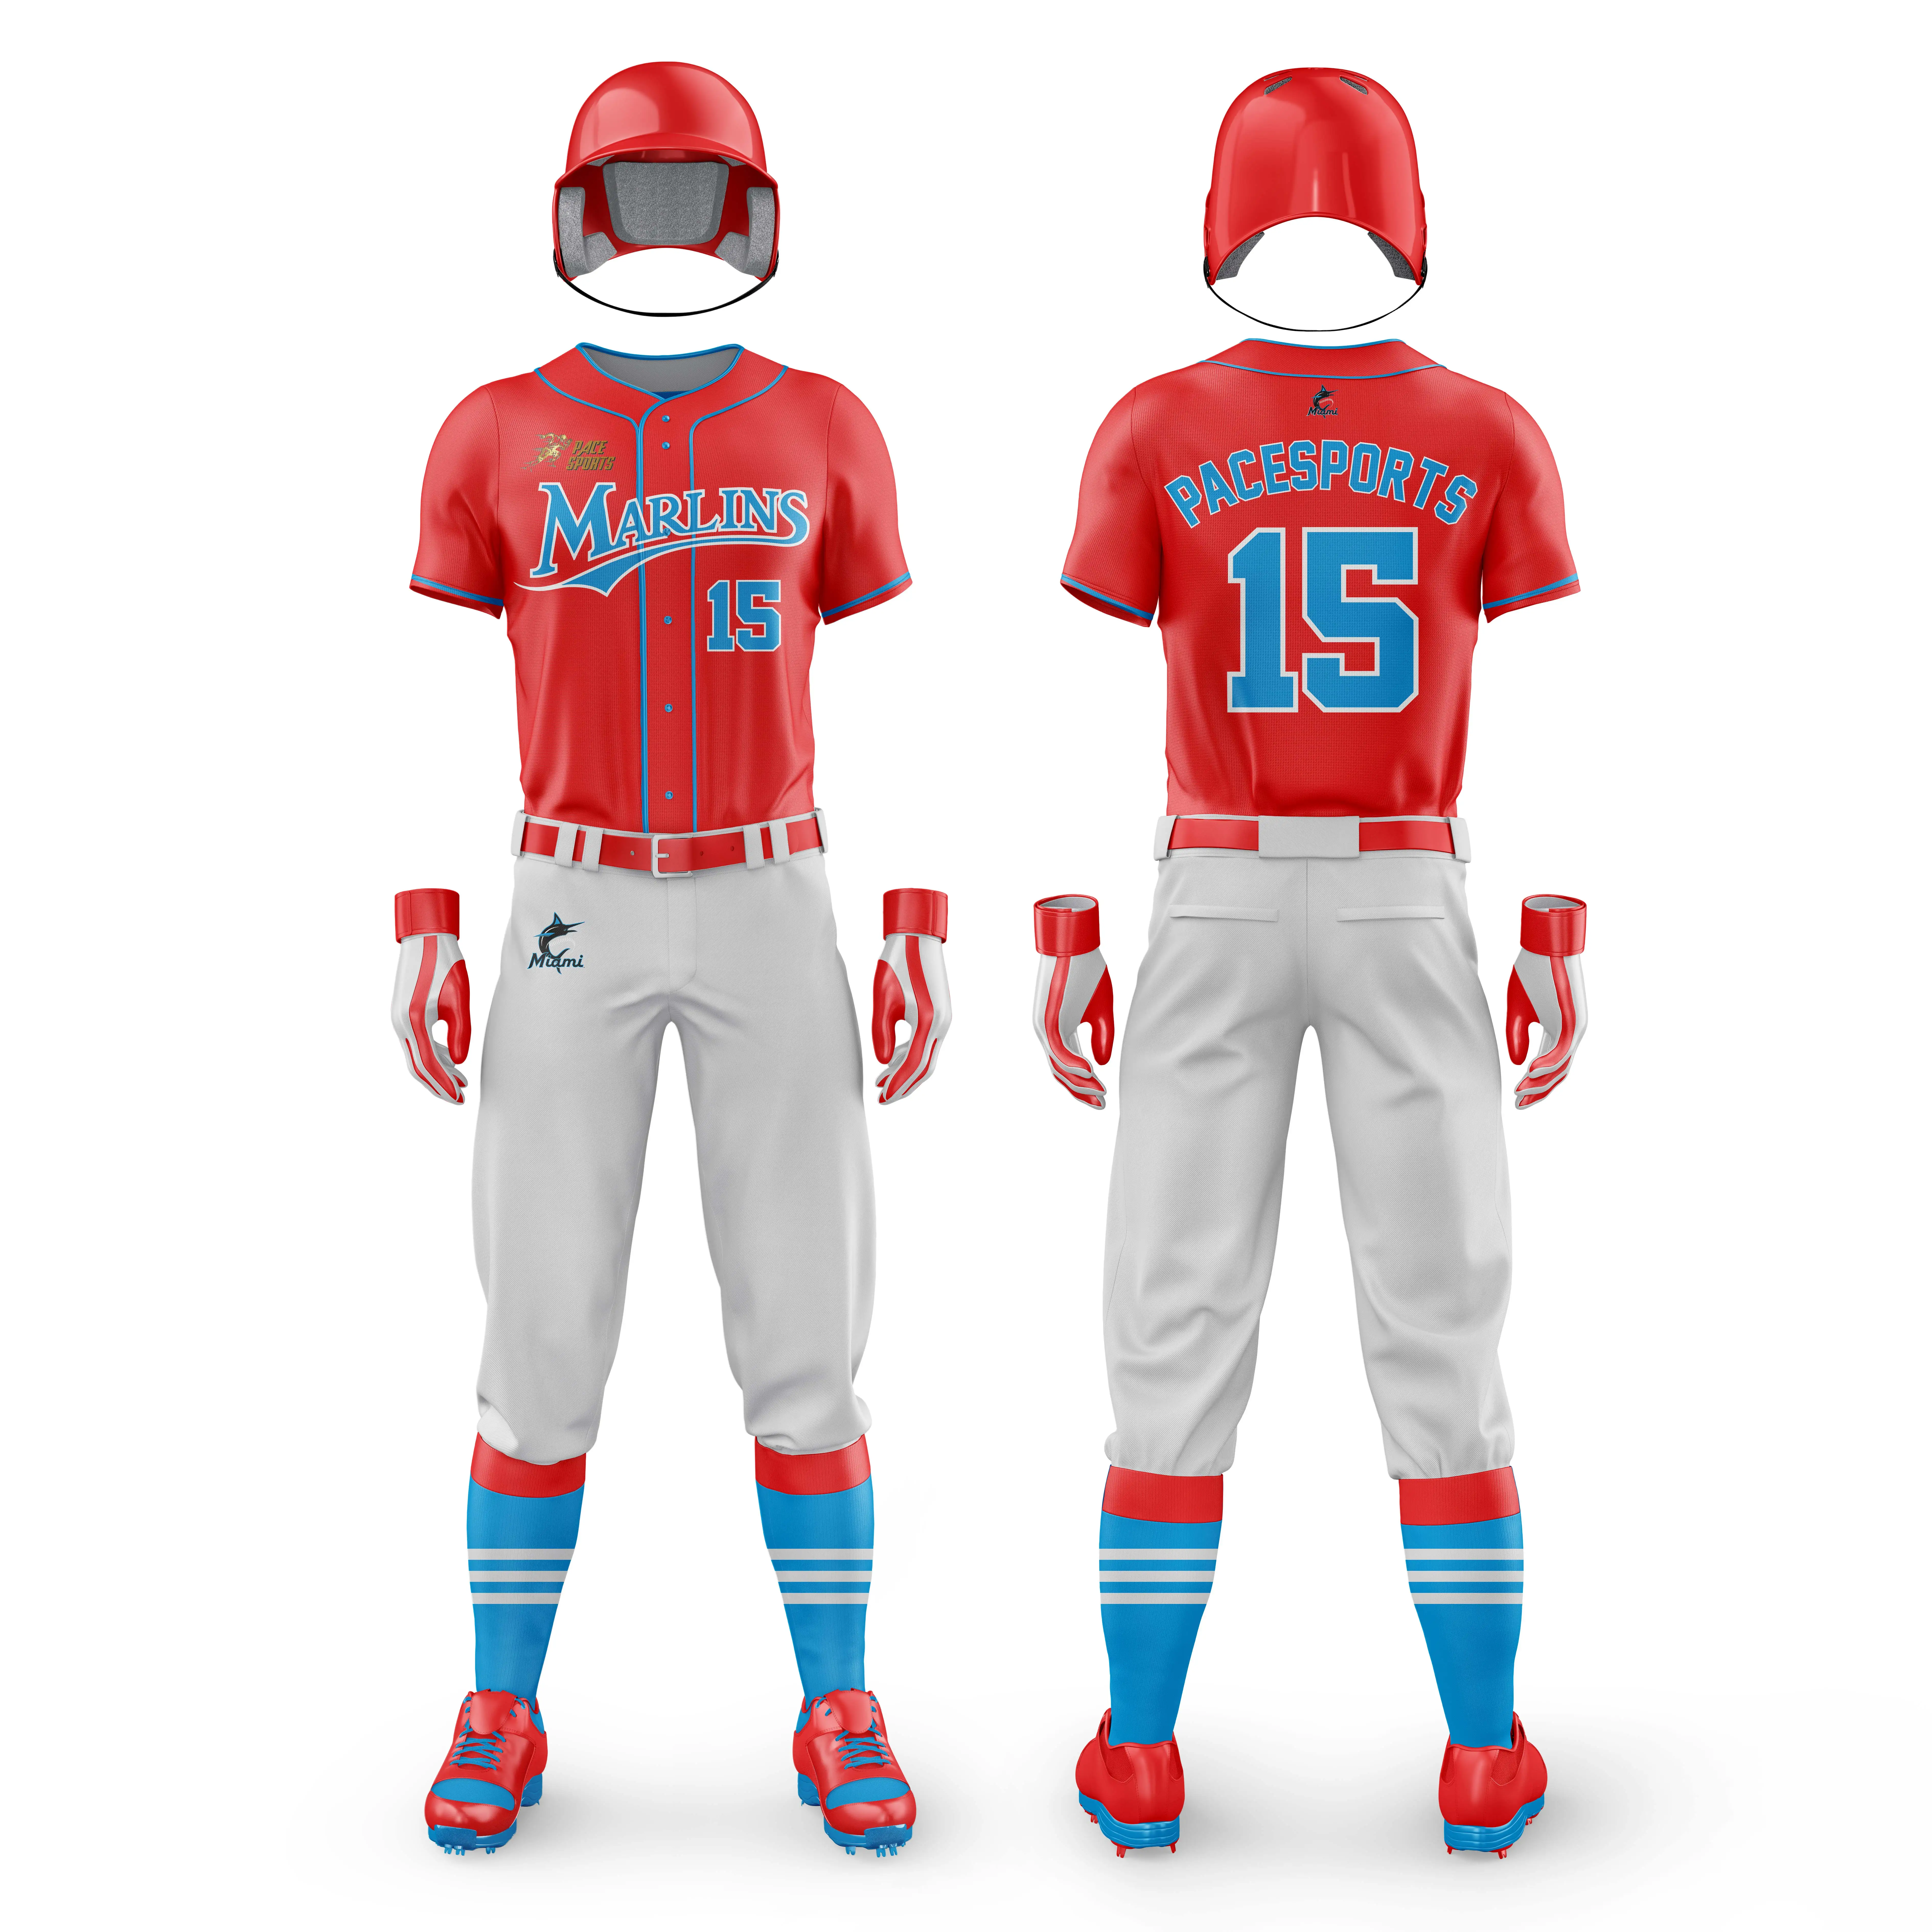 Source Youth mens strip custom baseball jersey custom sublimated embroidery  stitched baseball jersey on m.